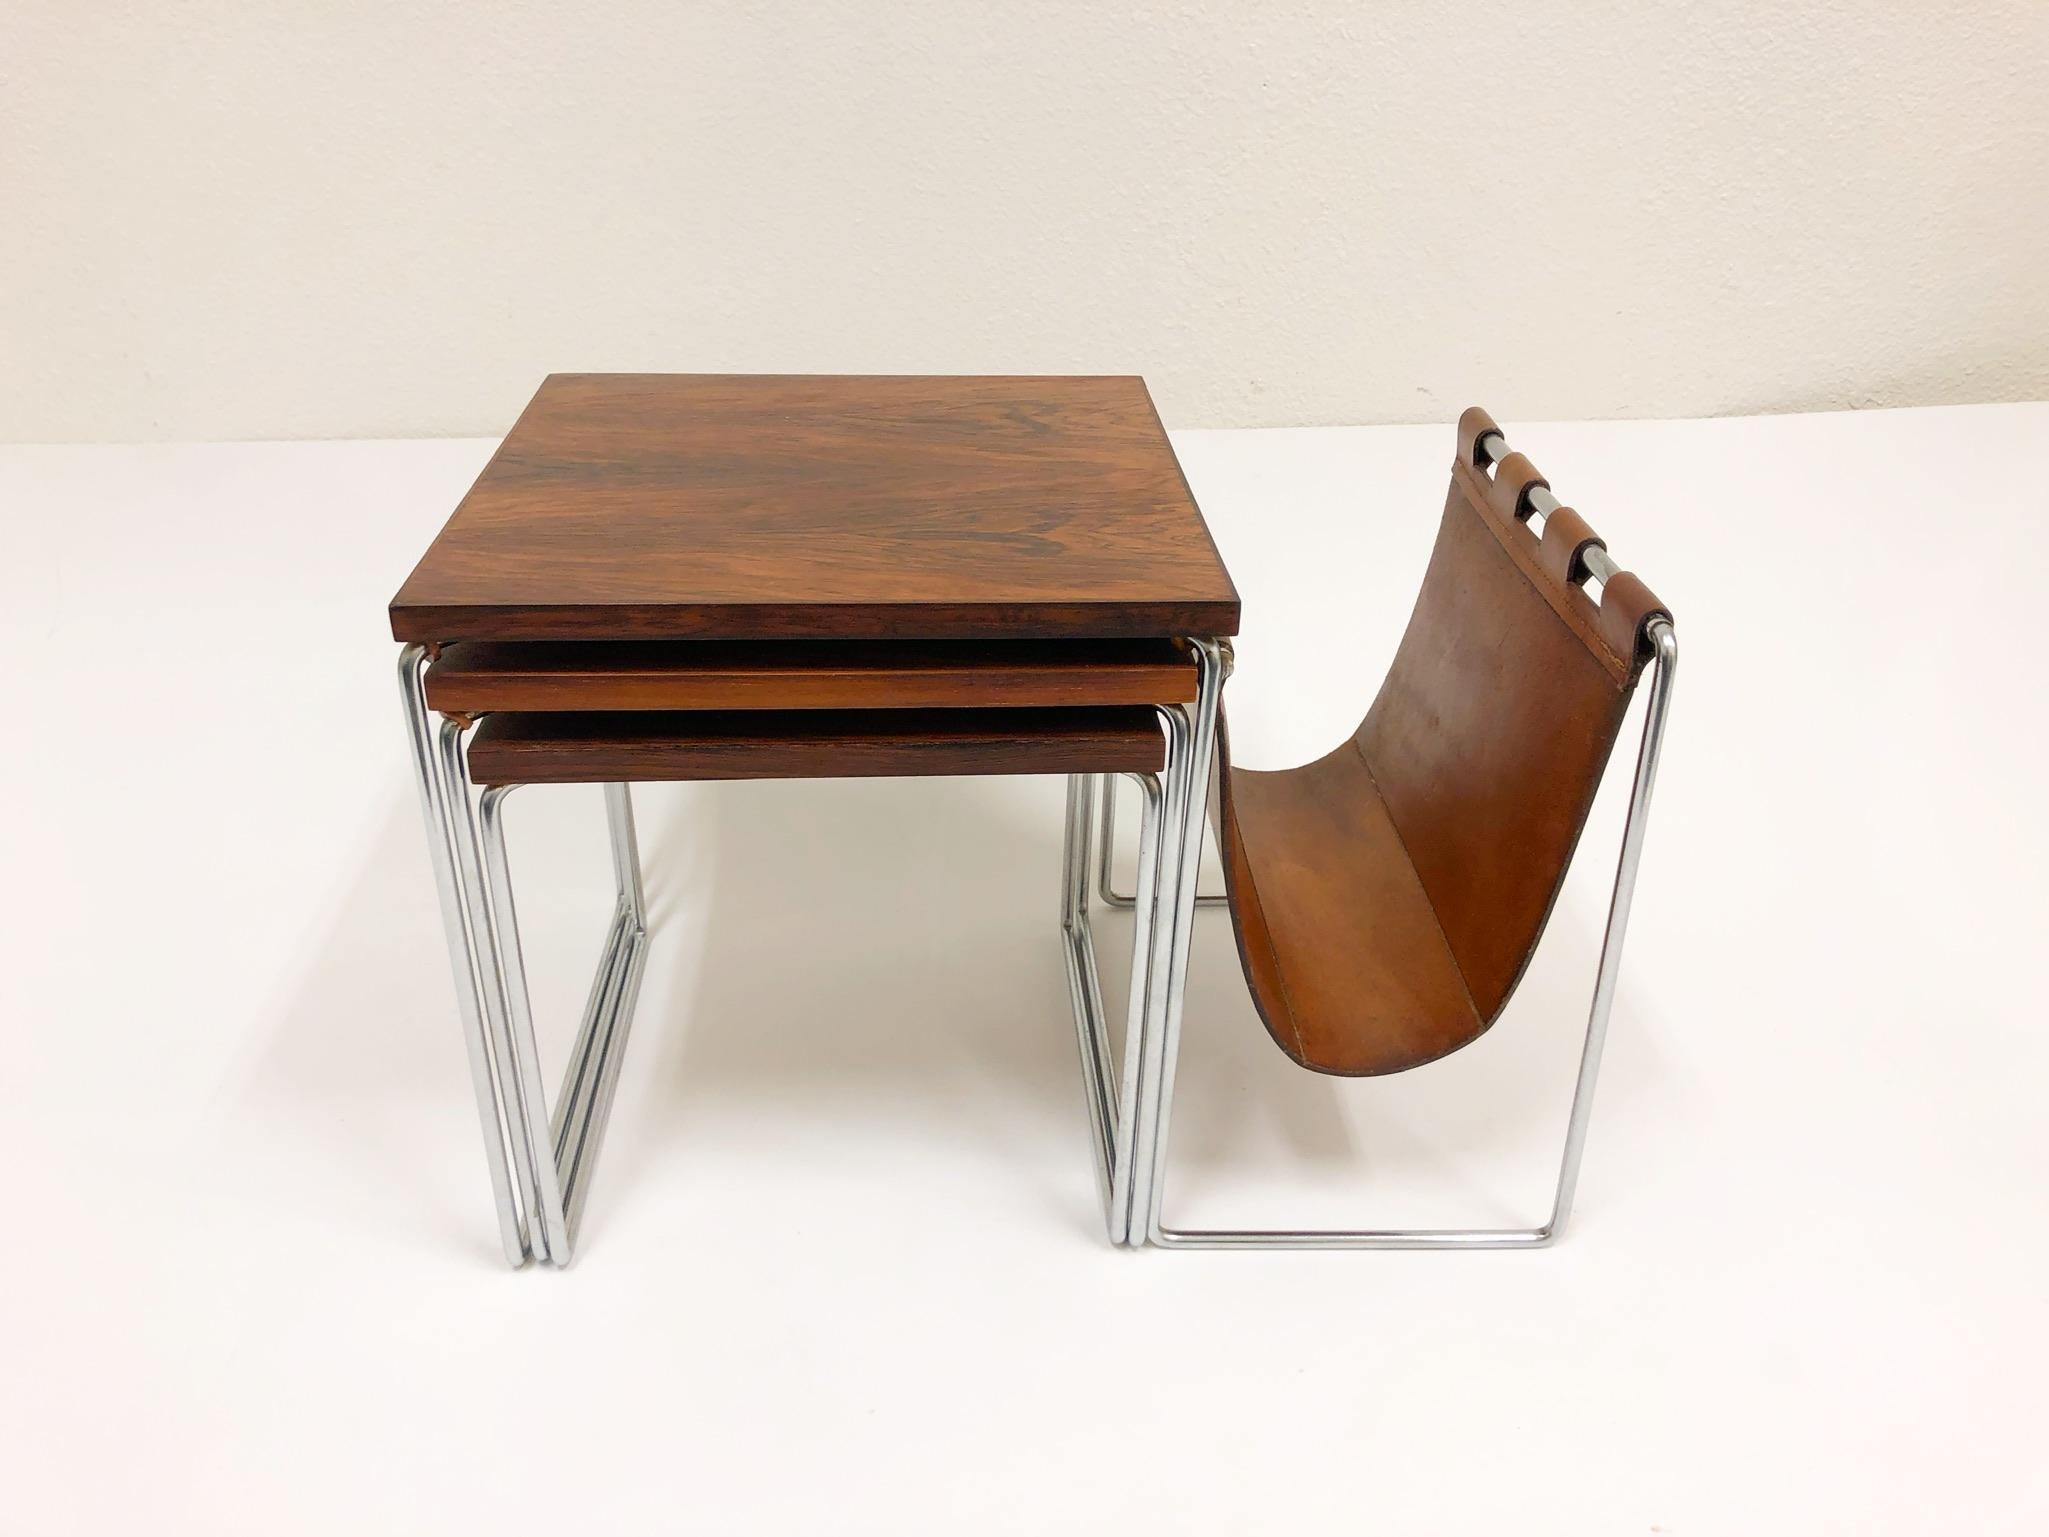 A beautiful set of three rosewood and chrome with a saddle leather magazine holder. This are in beautiful original condition.
Dimensions: Large -22” wide 13.75” deep 14.5” high.
Middle -12.75” wide 12.75” deep 13.25” high.
Small -11.75” wide